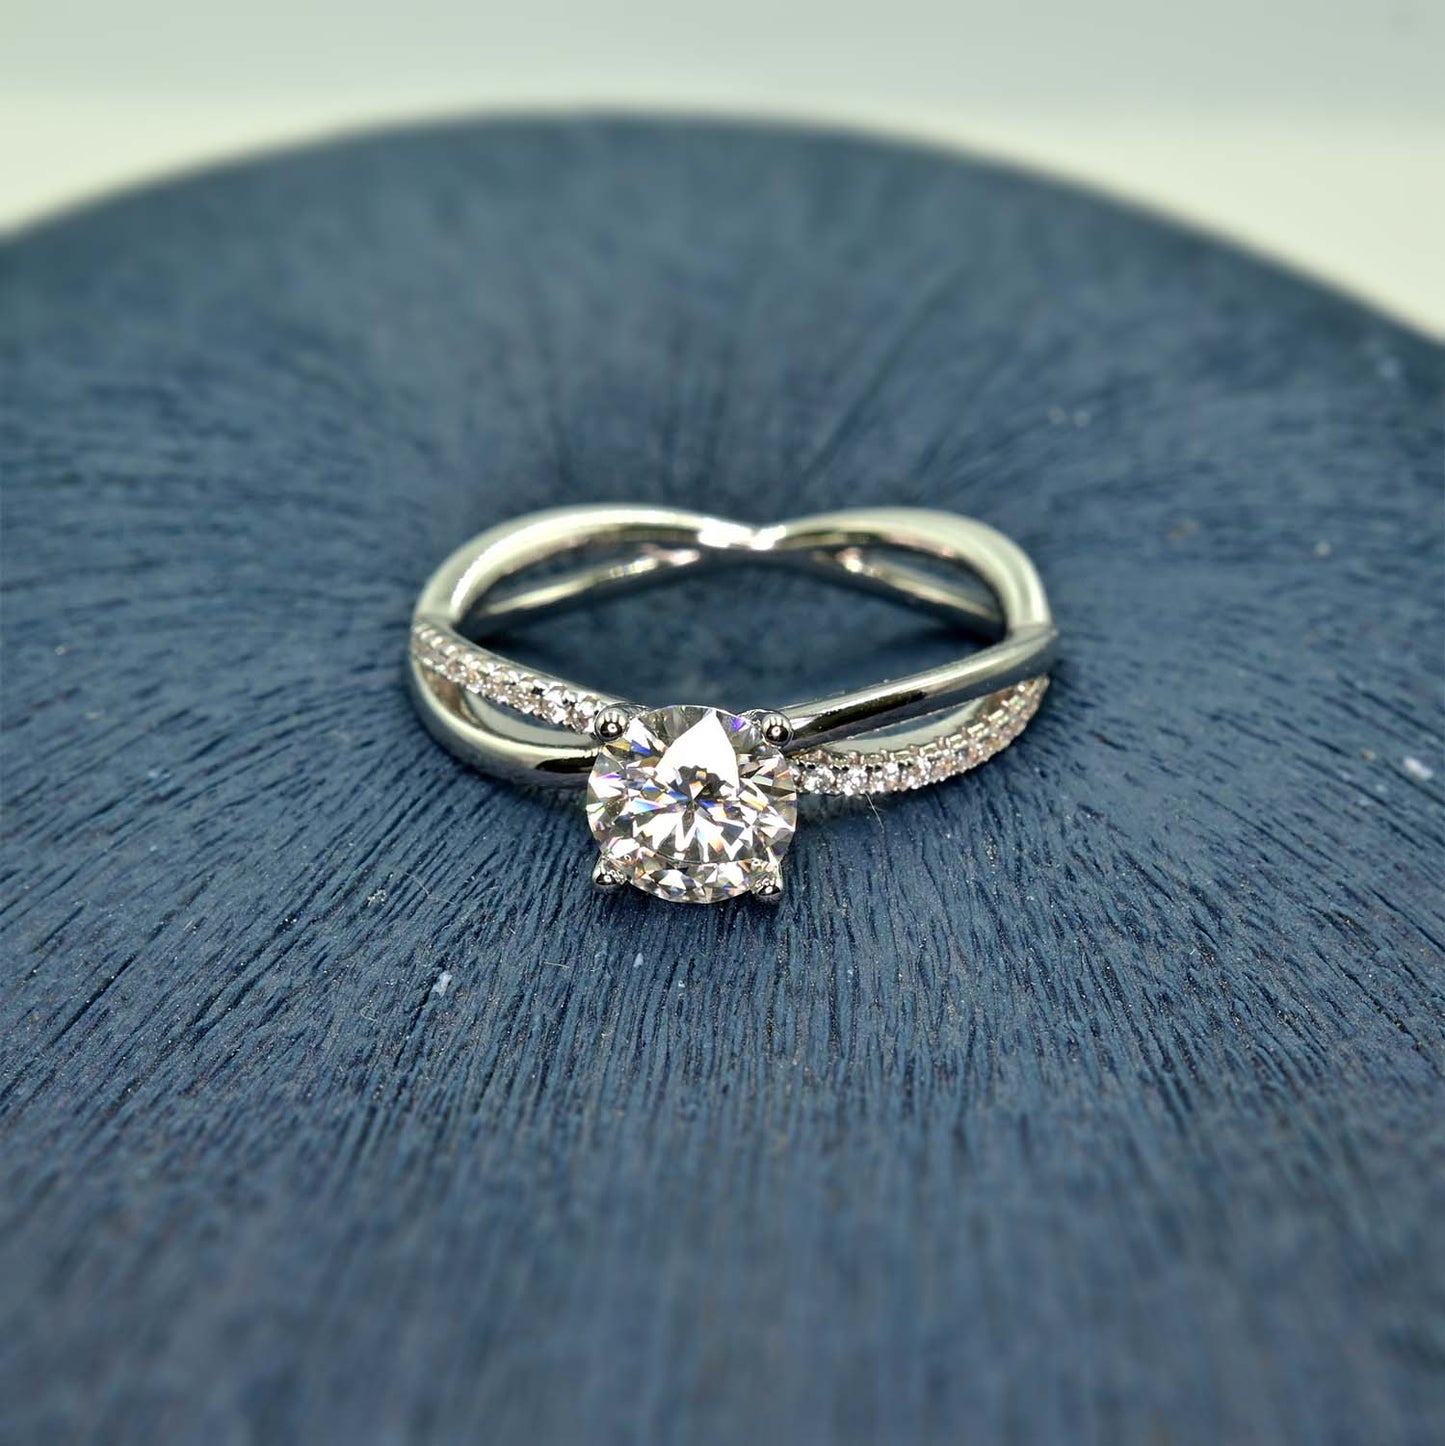 Ready for action with infinity moissanite ring